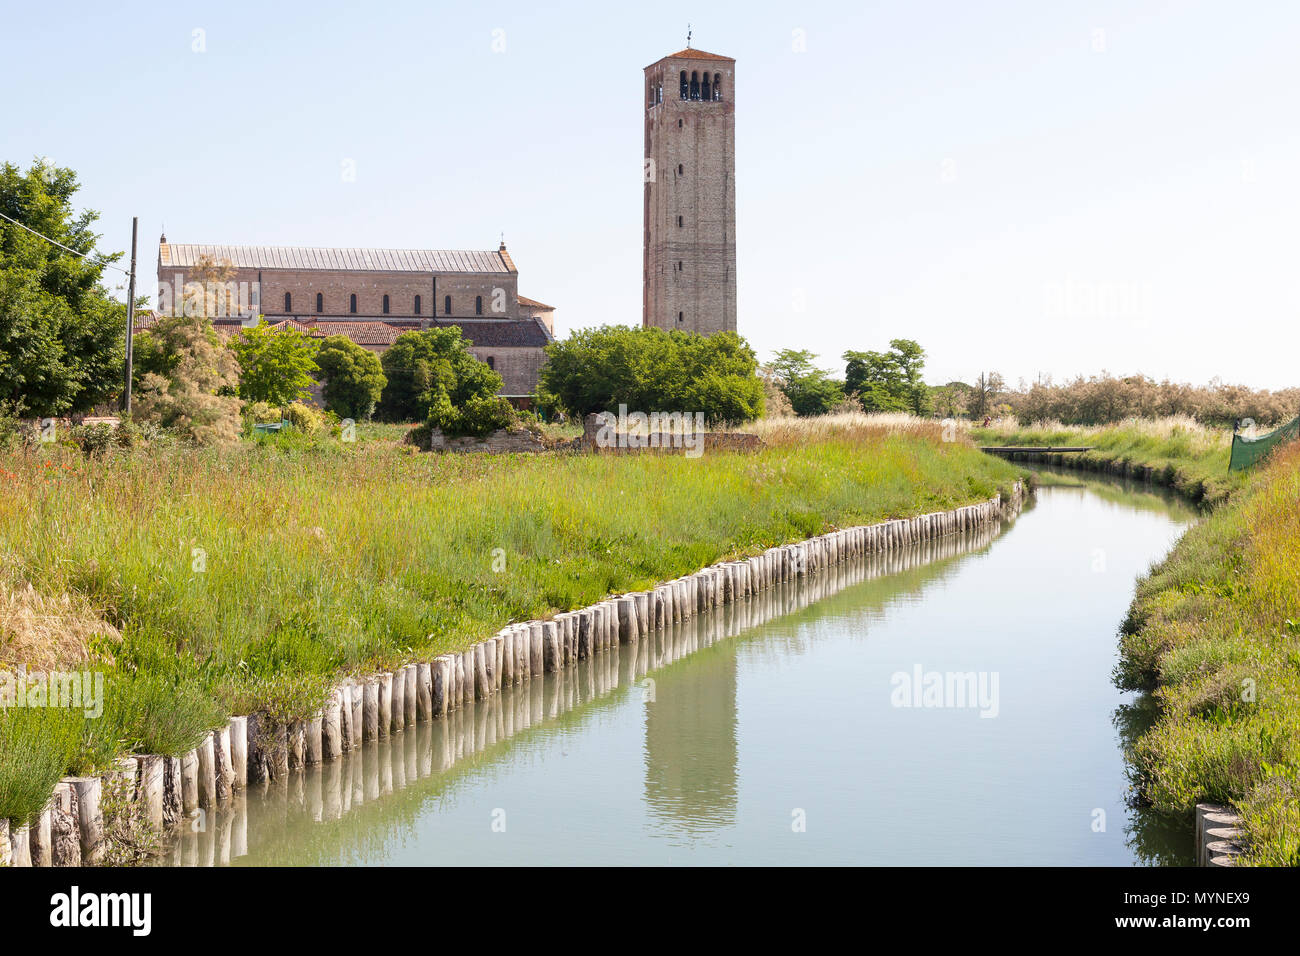 Basilica di Santa Maria Assunta at sunrise, Torcello Island, Venice, Veneto, Italy with the bell tower or campanile reflected in the canal. Scenic lan Stock Photo